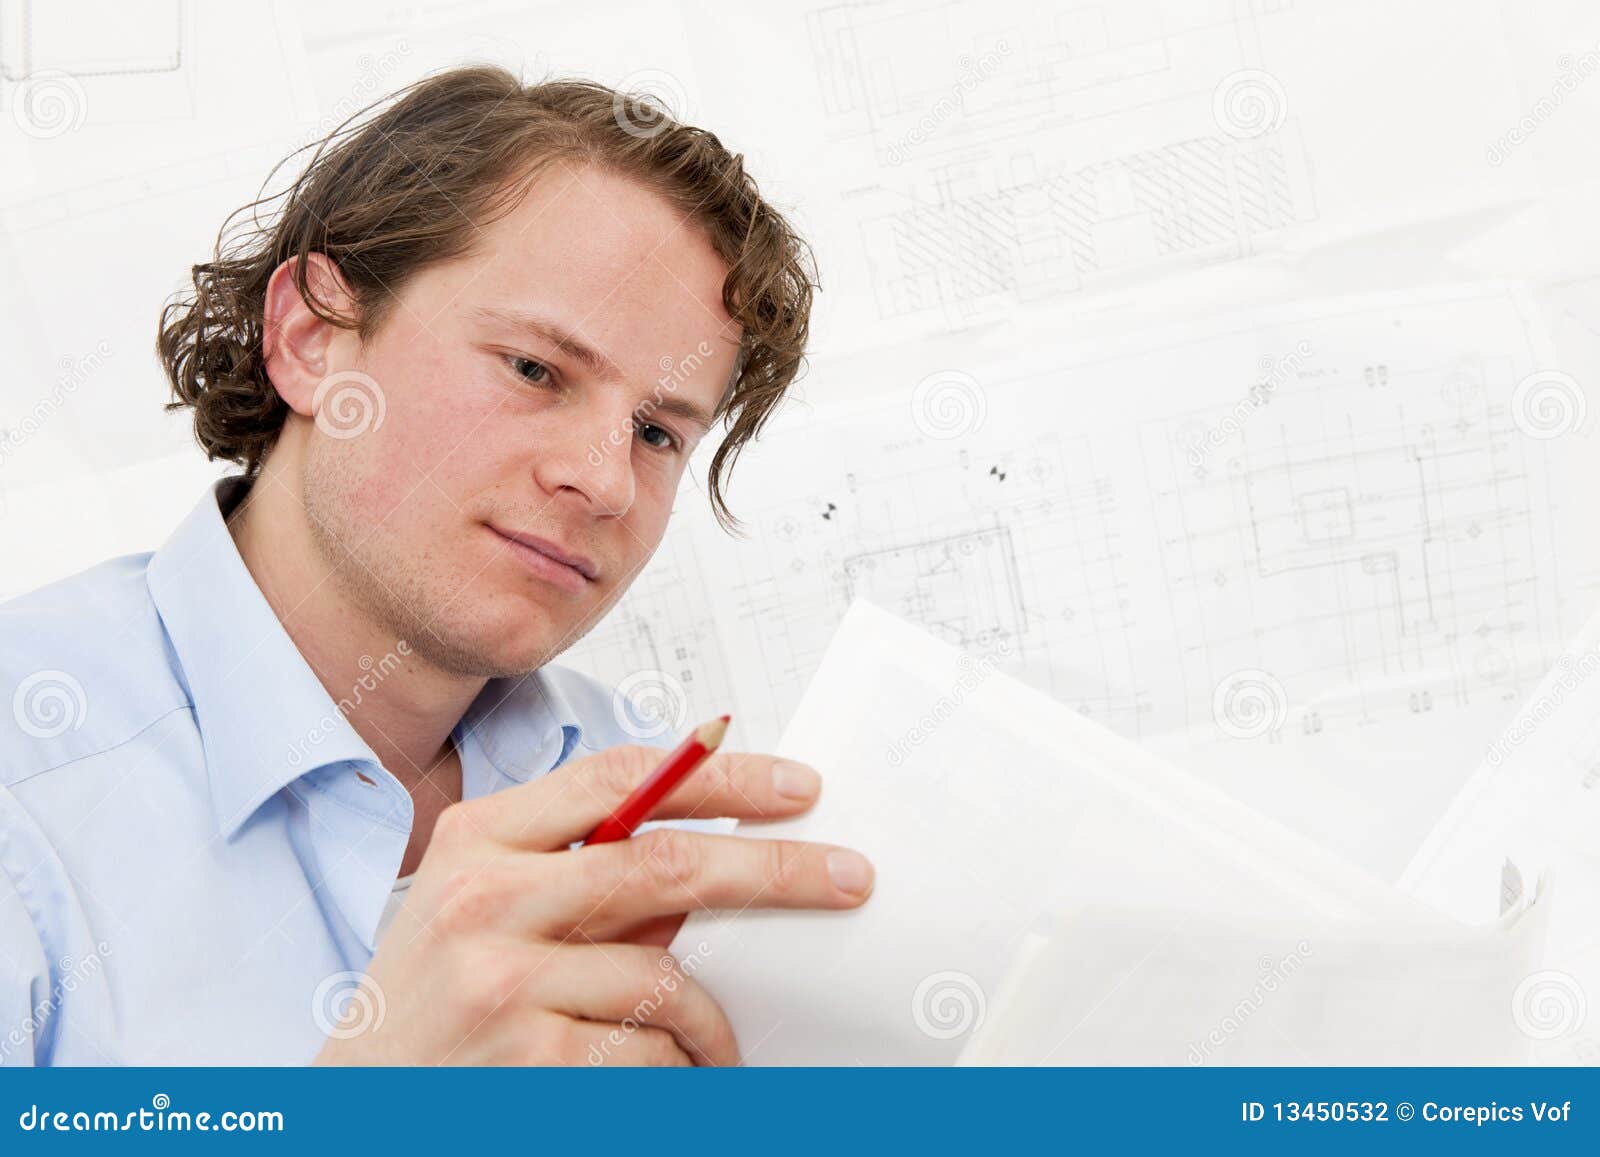 Reviewing Technical Drawings Stock Photo - Image of tilted, single